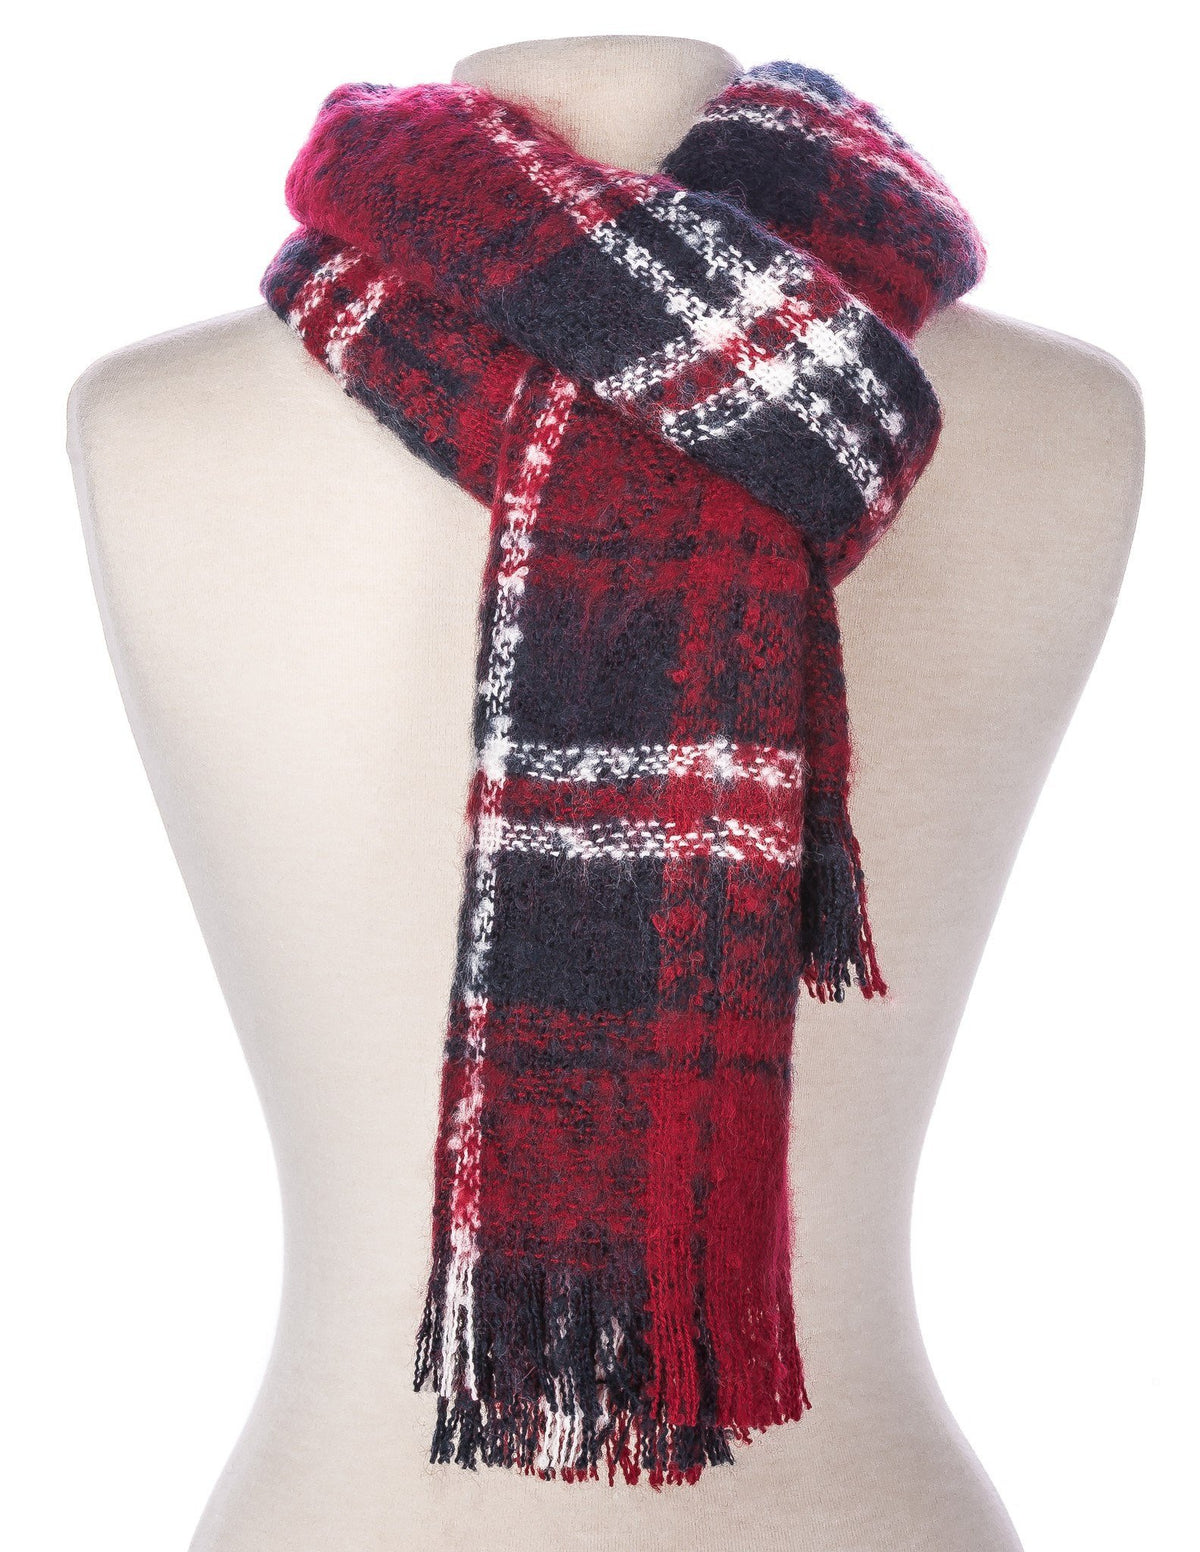 Men's Westminster Plaid Winter Scarf - Red/Navy